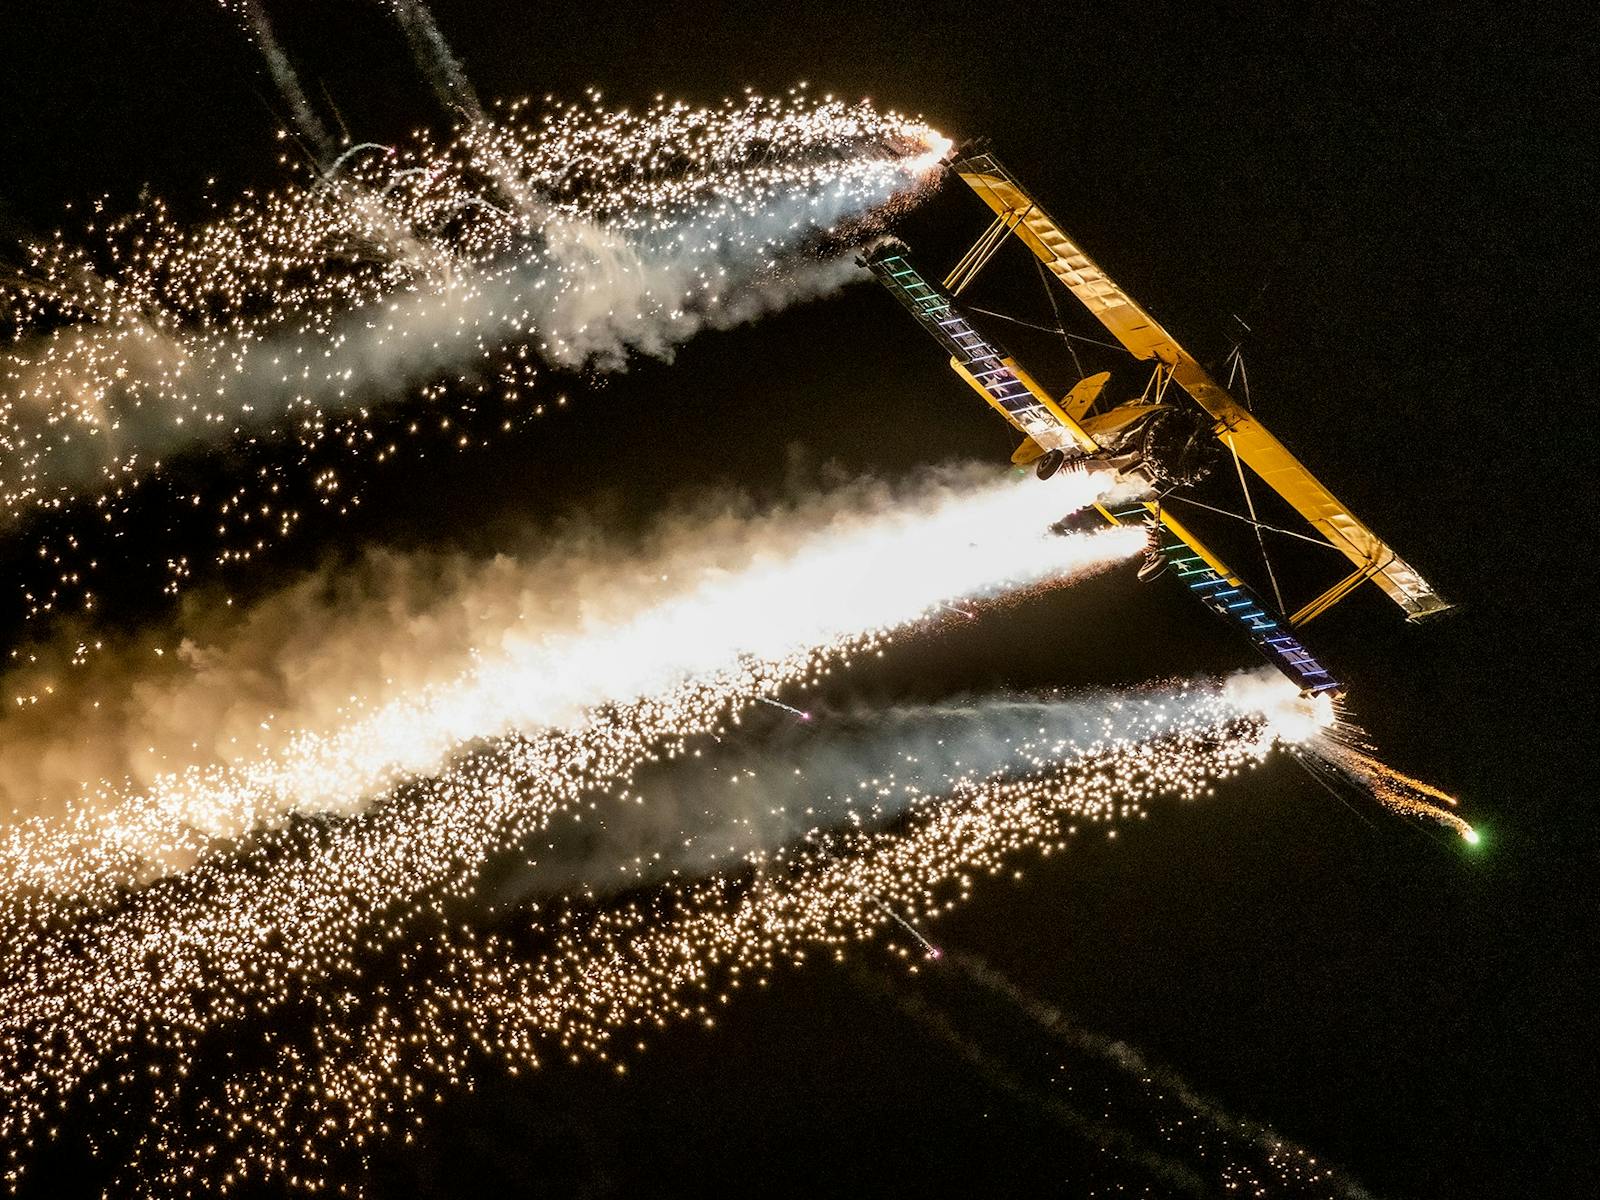 Scandinavian Airshows wowing with their Night Aerobatics with fireworks and laser show!